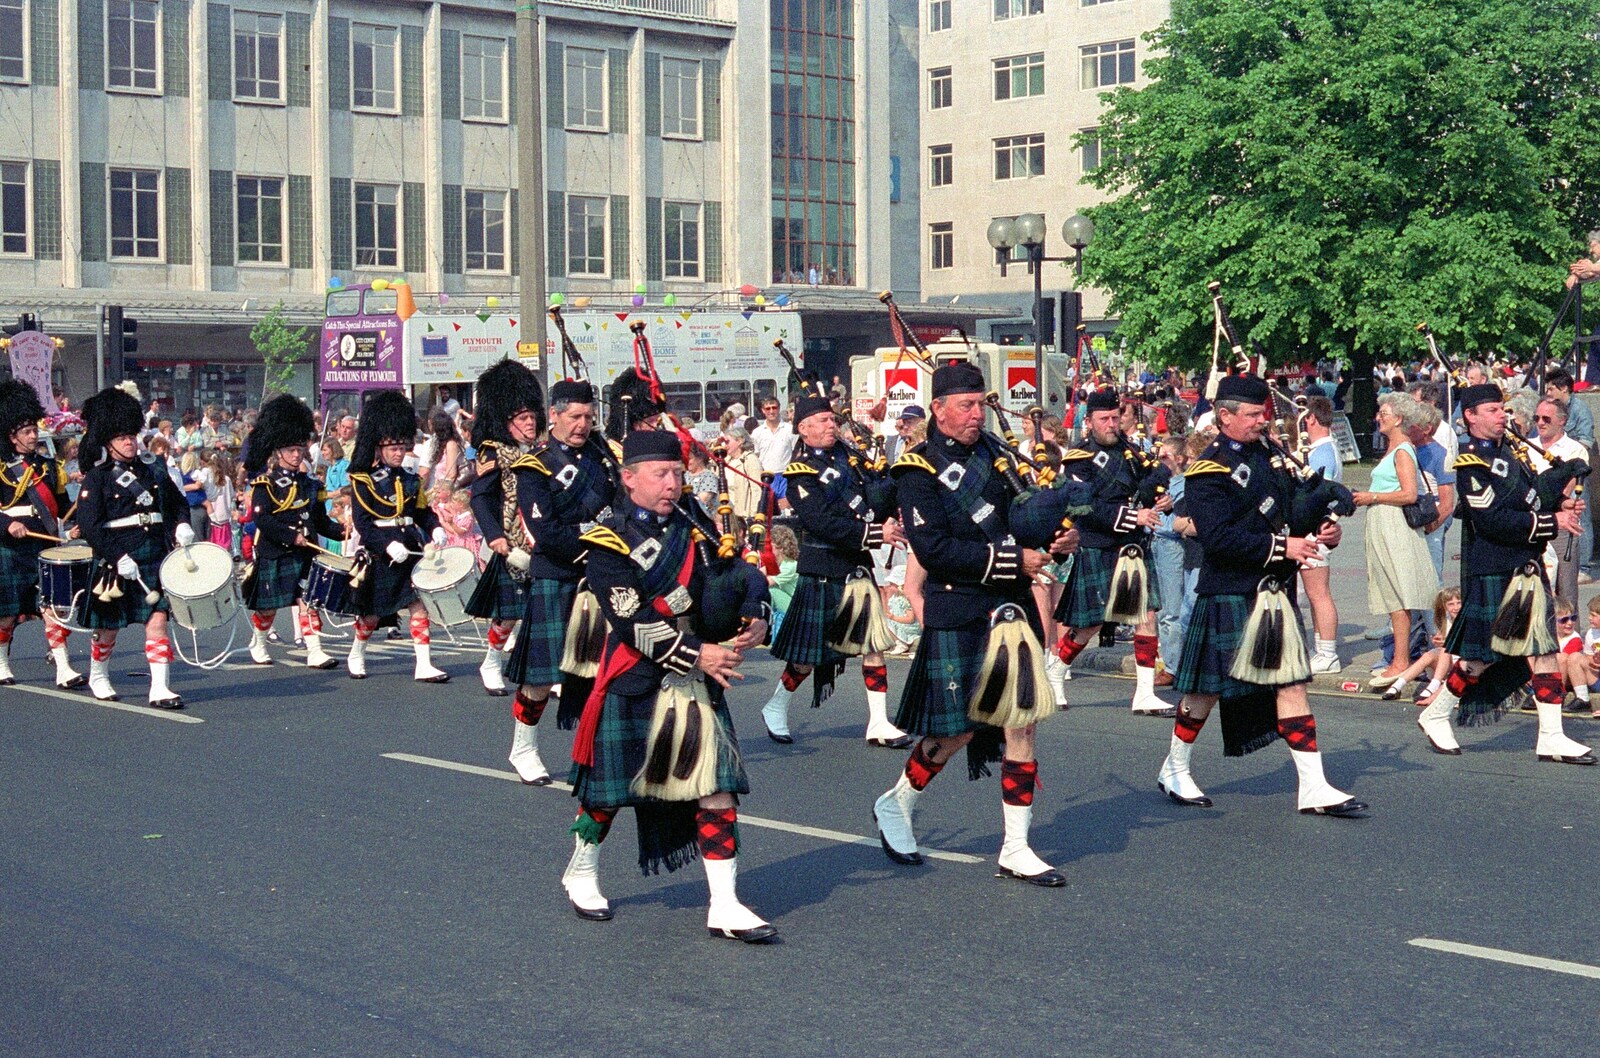 A bagpipe band from Chantal and Andy's Wedding, and the Lord Mayor's Parade, Plymouth - 20th May 1987